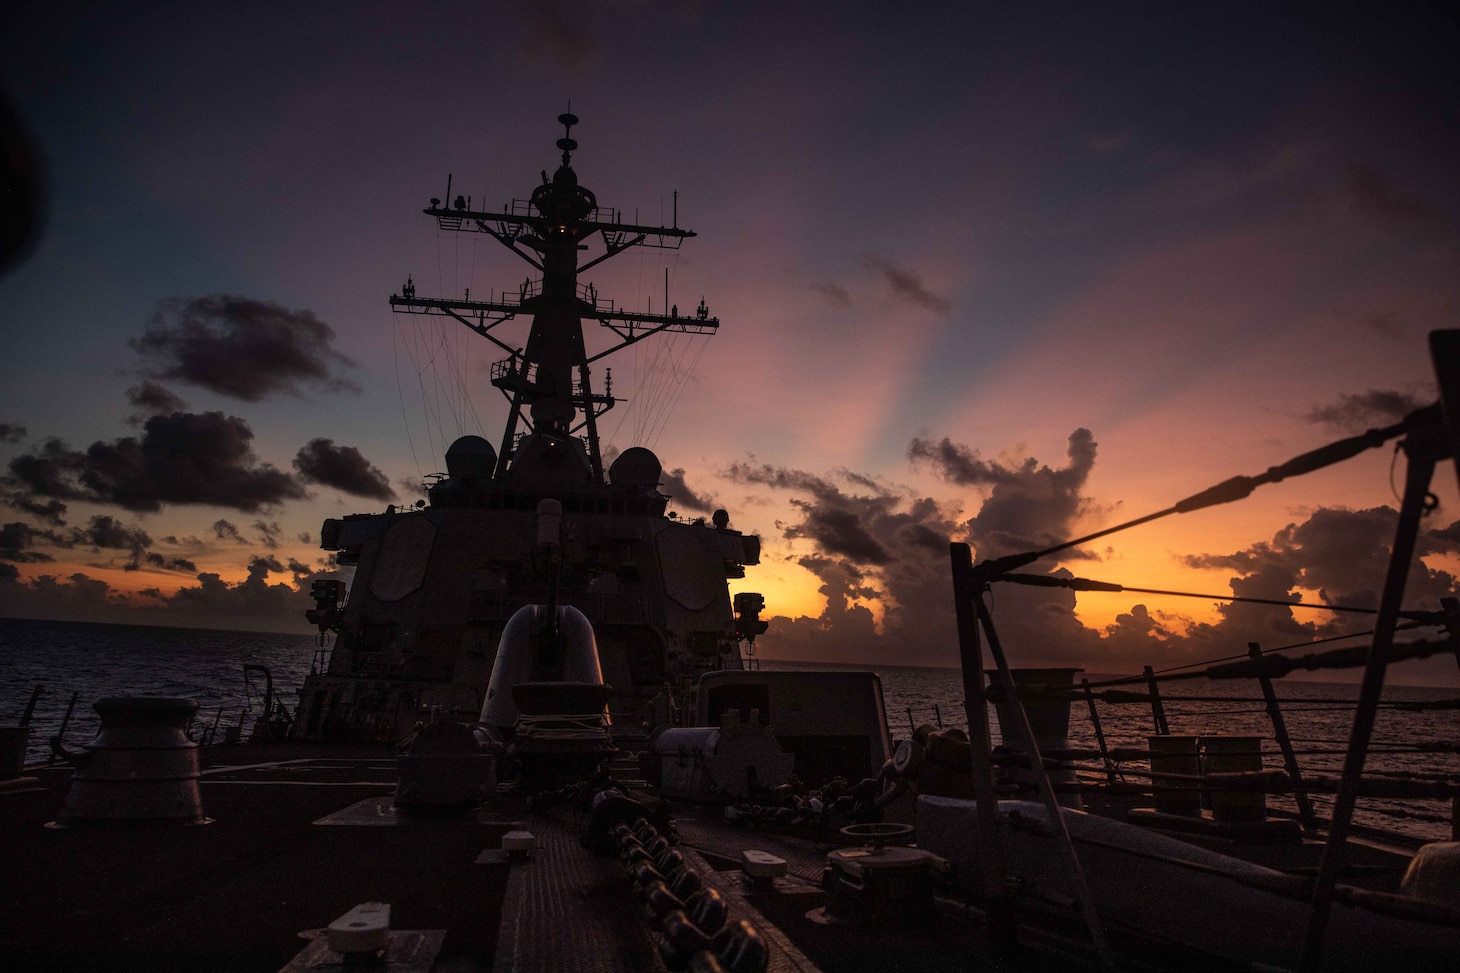 The Arleigh Burke-class guided-missile destroyer USS Curtis Wilbur (DDG 54) conducts routine operations in the South China Sea. Curtis Wilbur is assigned to Commander, Task Force 71/Destroyer Squadron (DESRON) 15, the Navy’s largest forward DESRON and the U.S. 7th Fleet’s principal surface force.